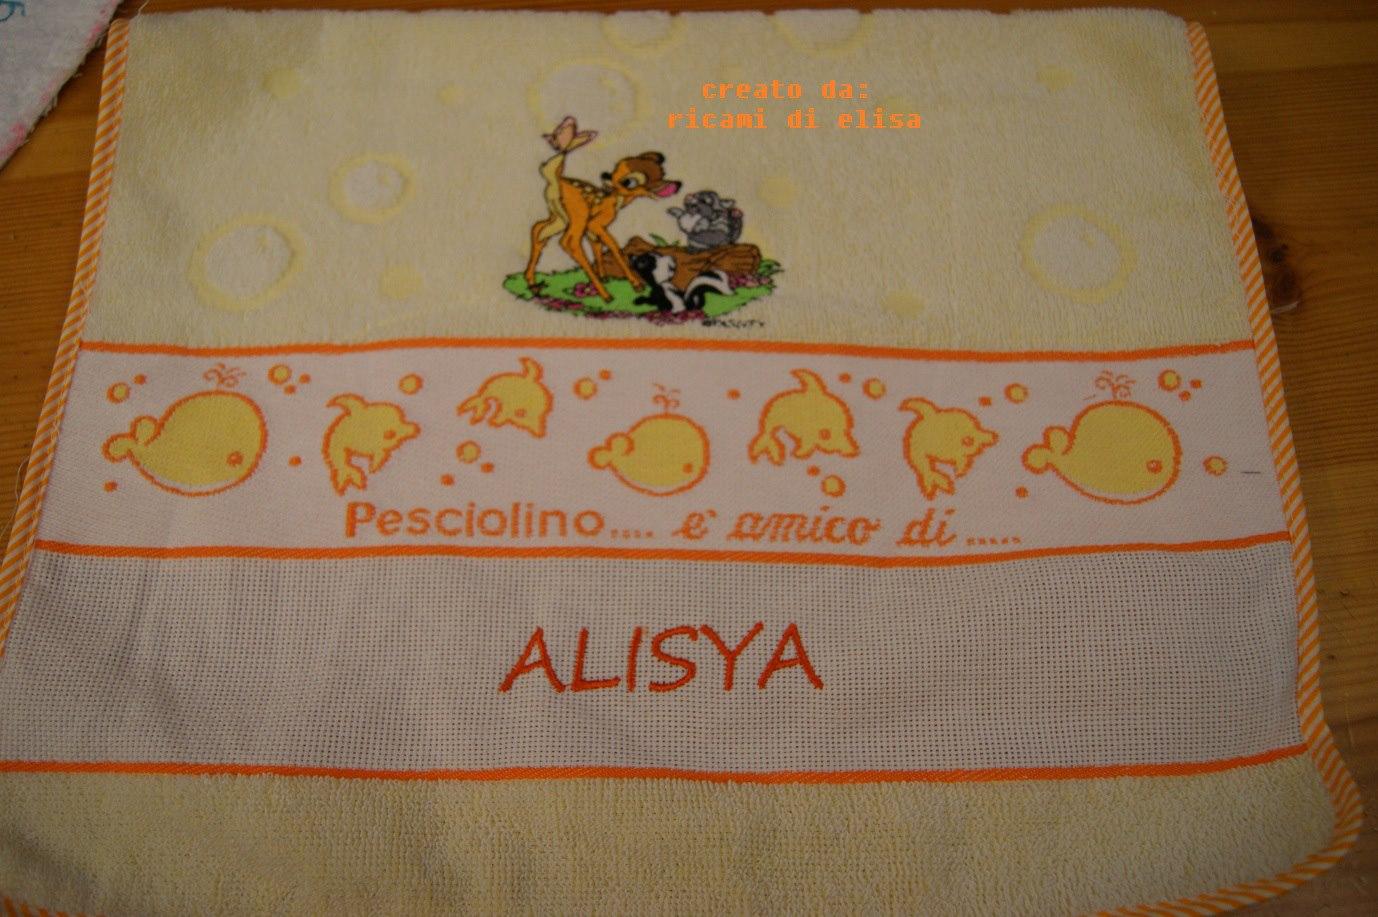 Towel with Bambi and company embroidery design